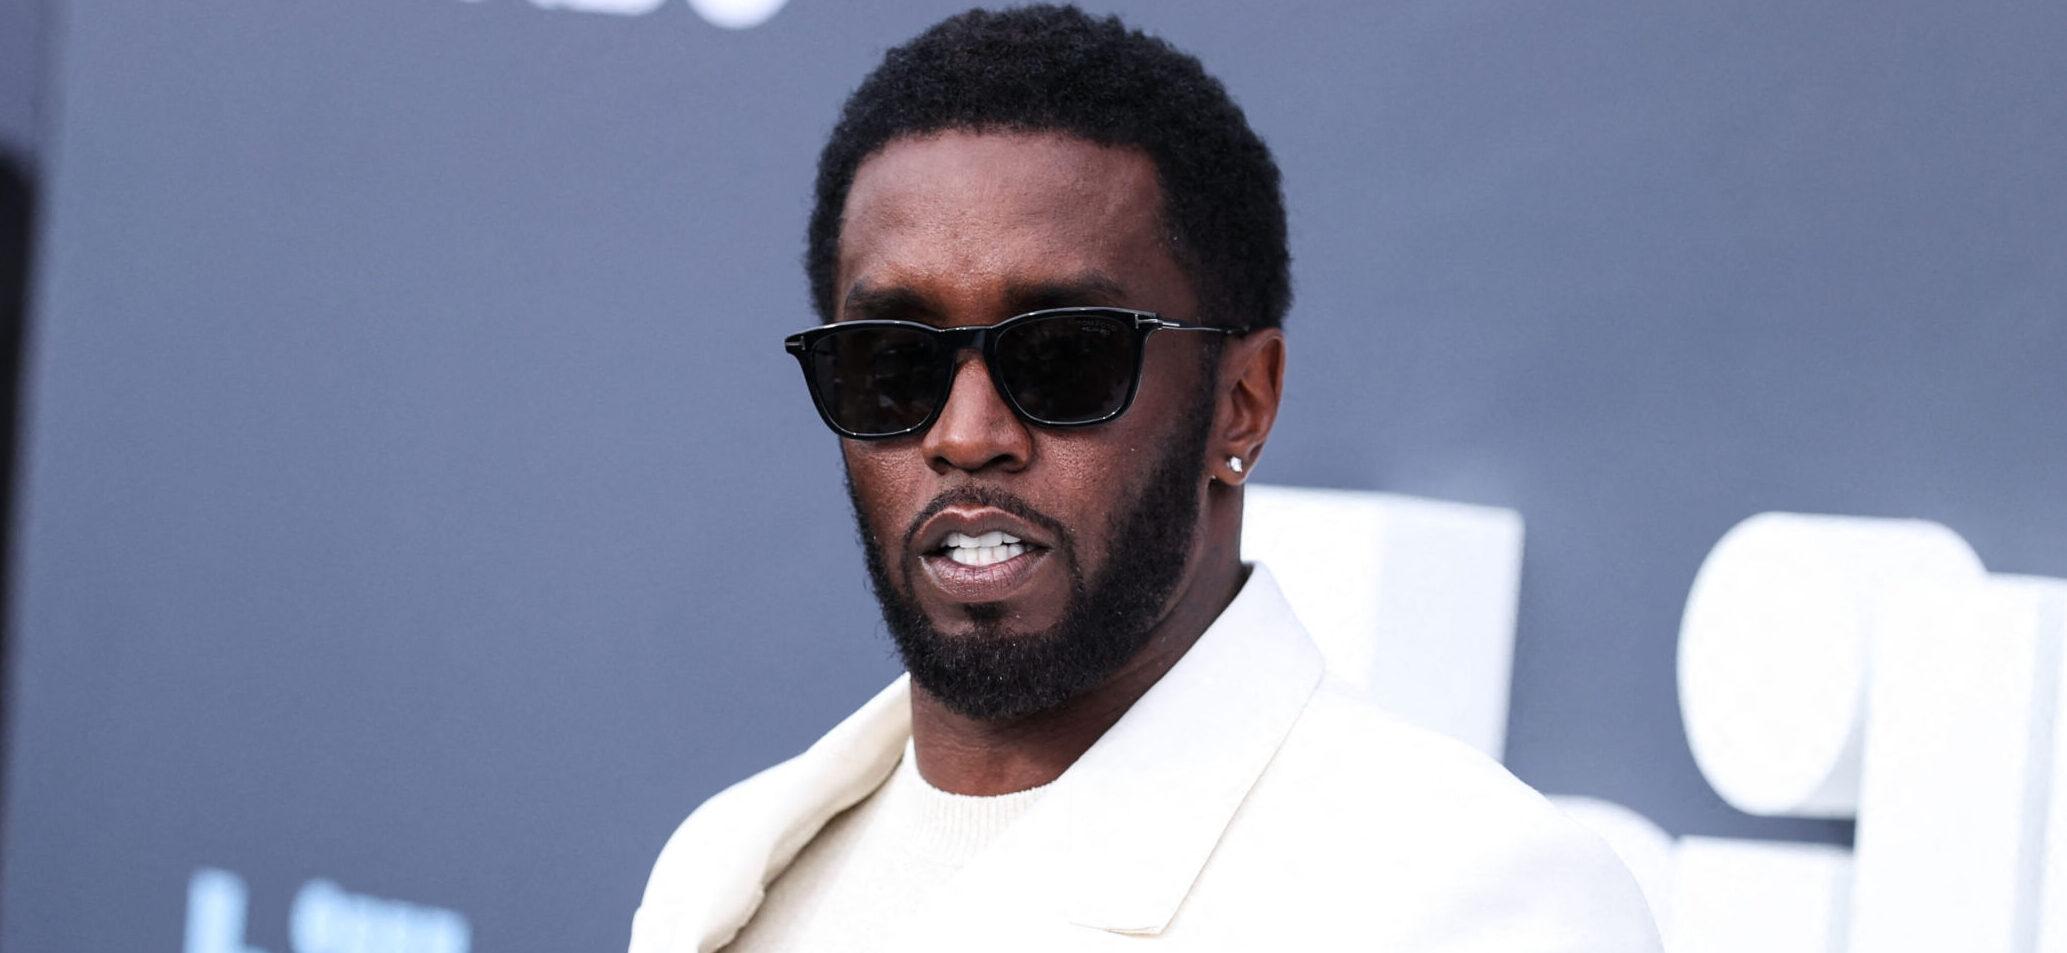 Peloton Cuts Ties With Diddy Over Assault Video, Ban Use Of Rapper’s Music